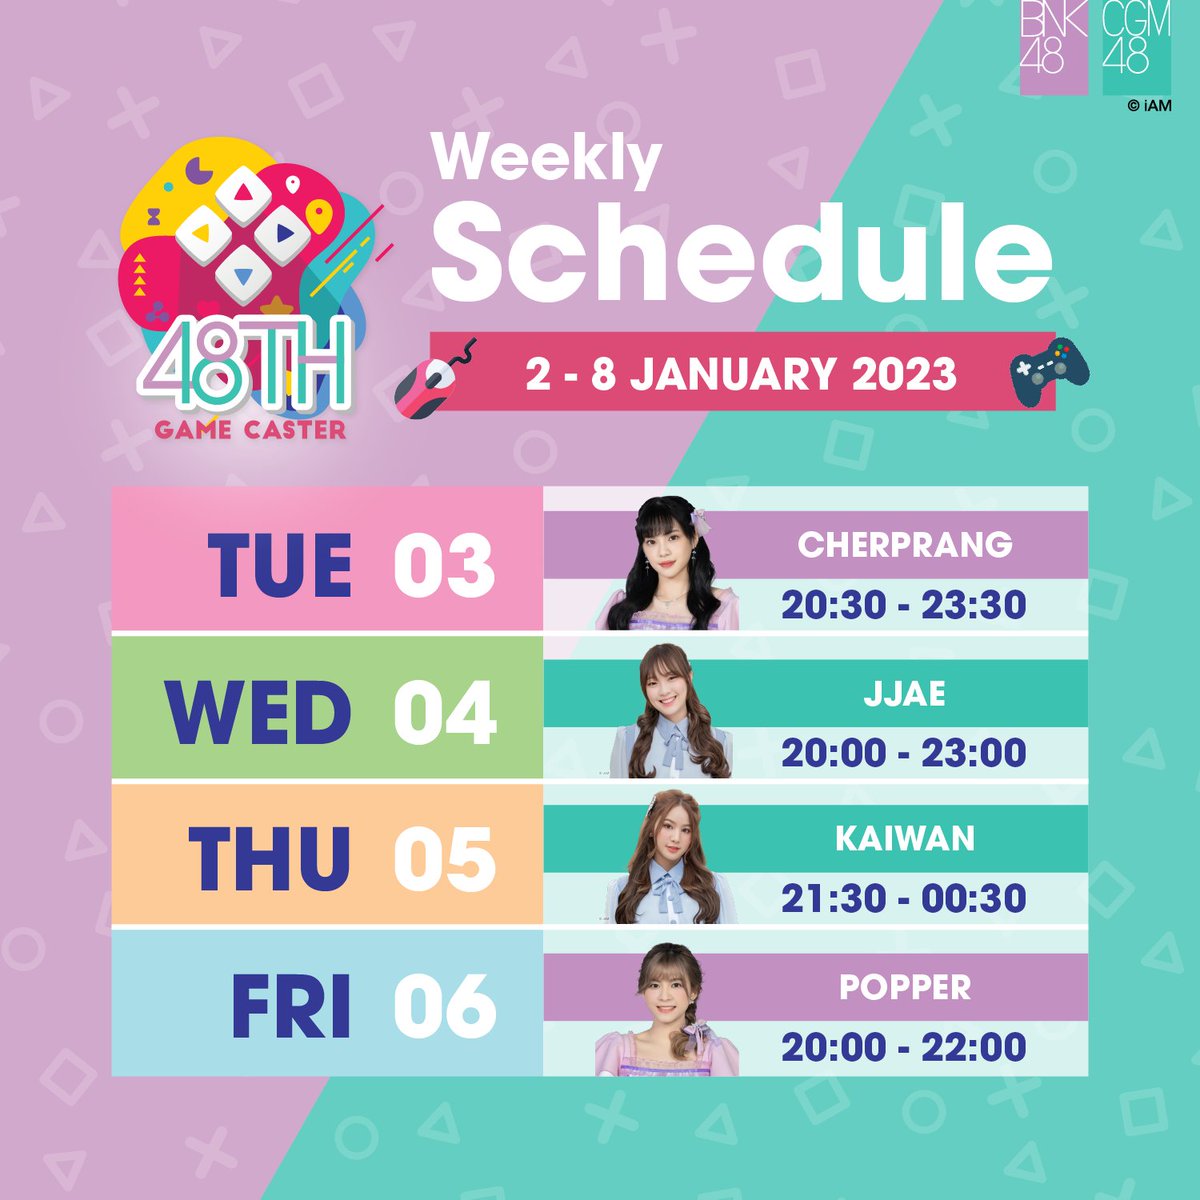 Bnk48 On Twitter 🎮weekly Schedule 2 8 January 2023👾 พบกับเหล่า Caster ได้ตามเวลาต่อไปนี้กัน